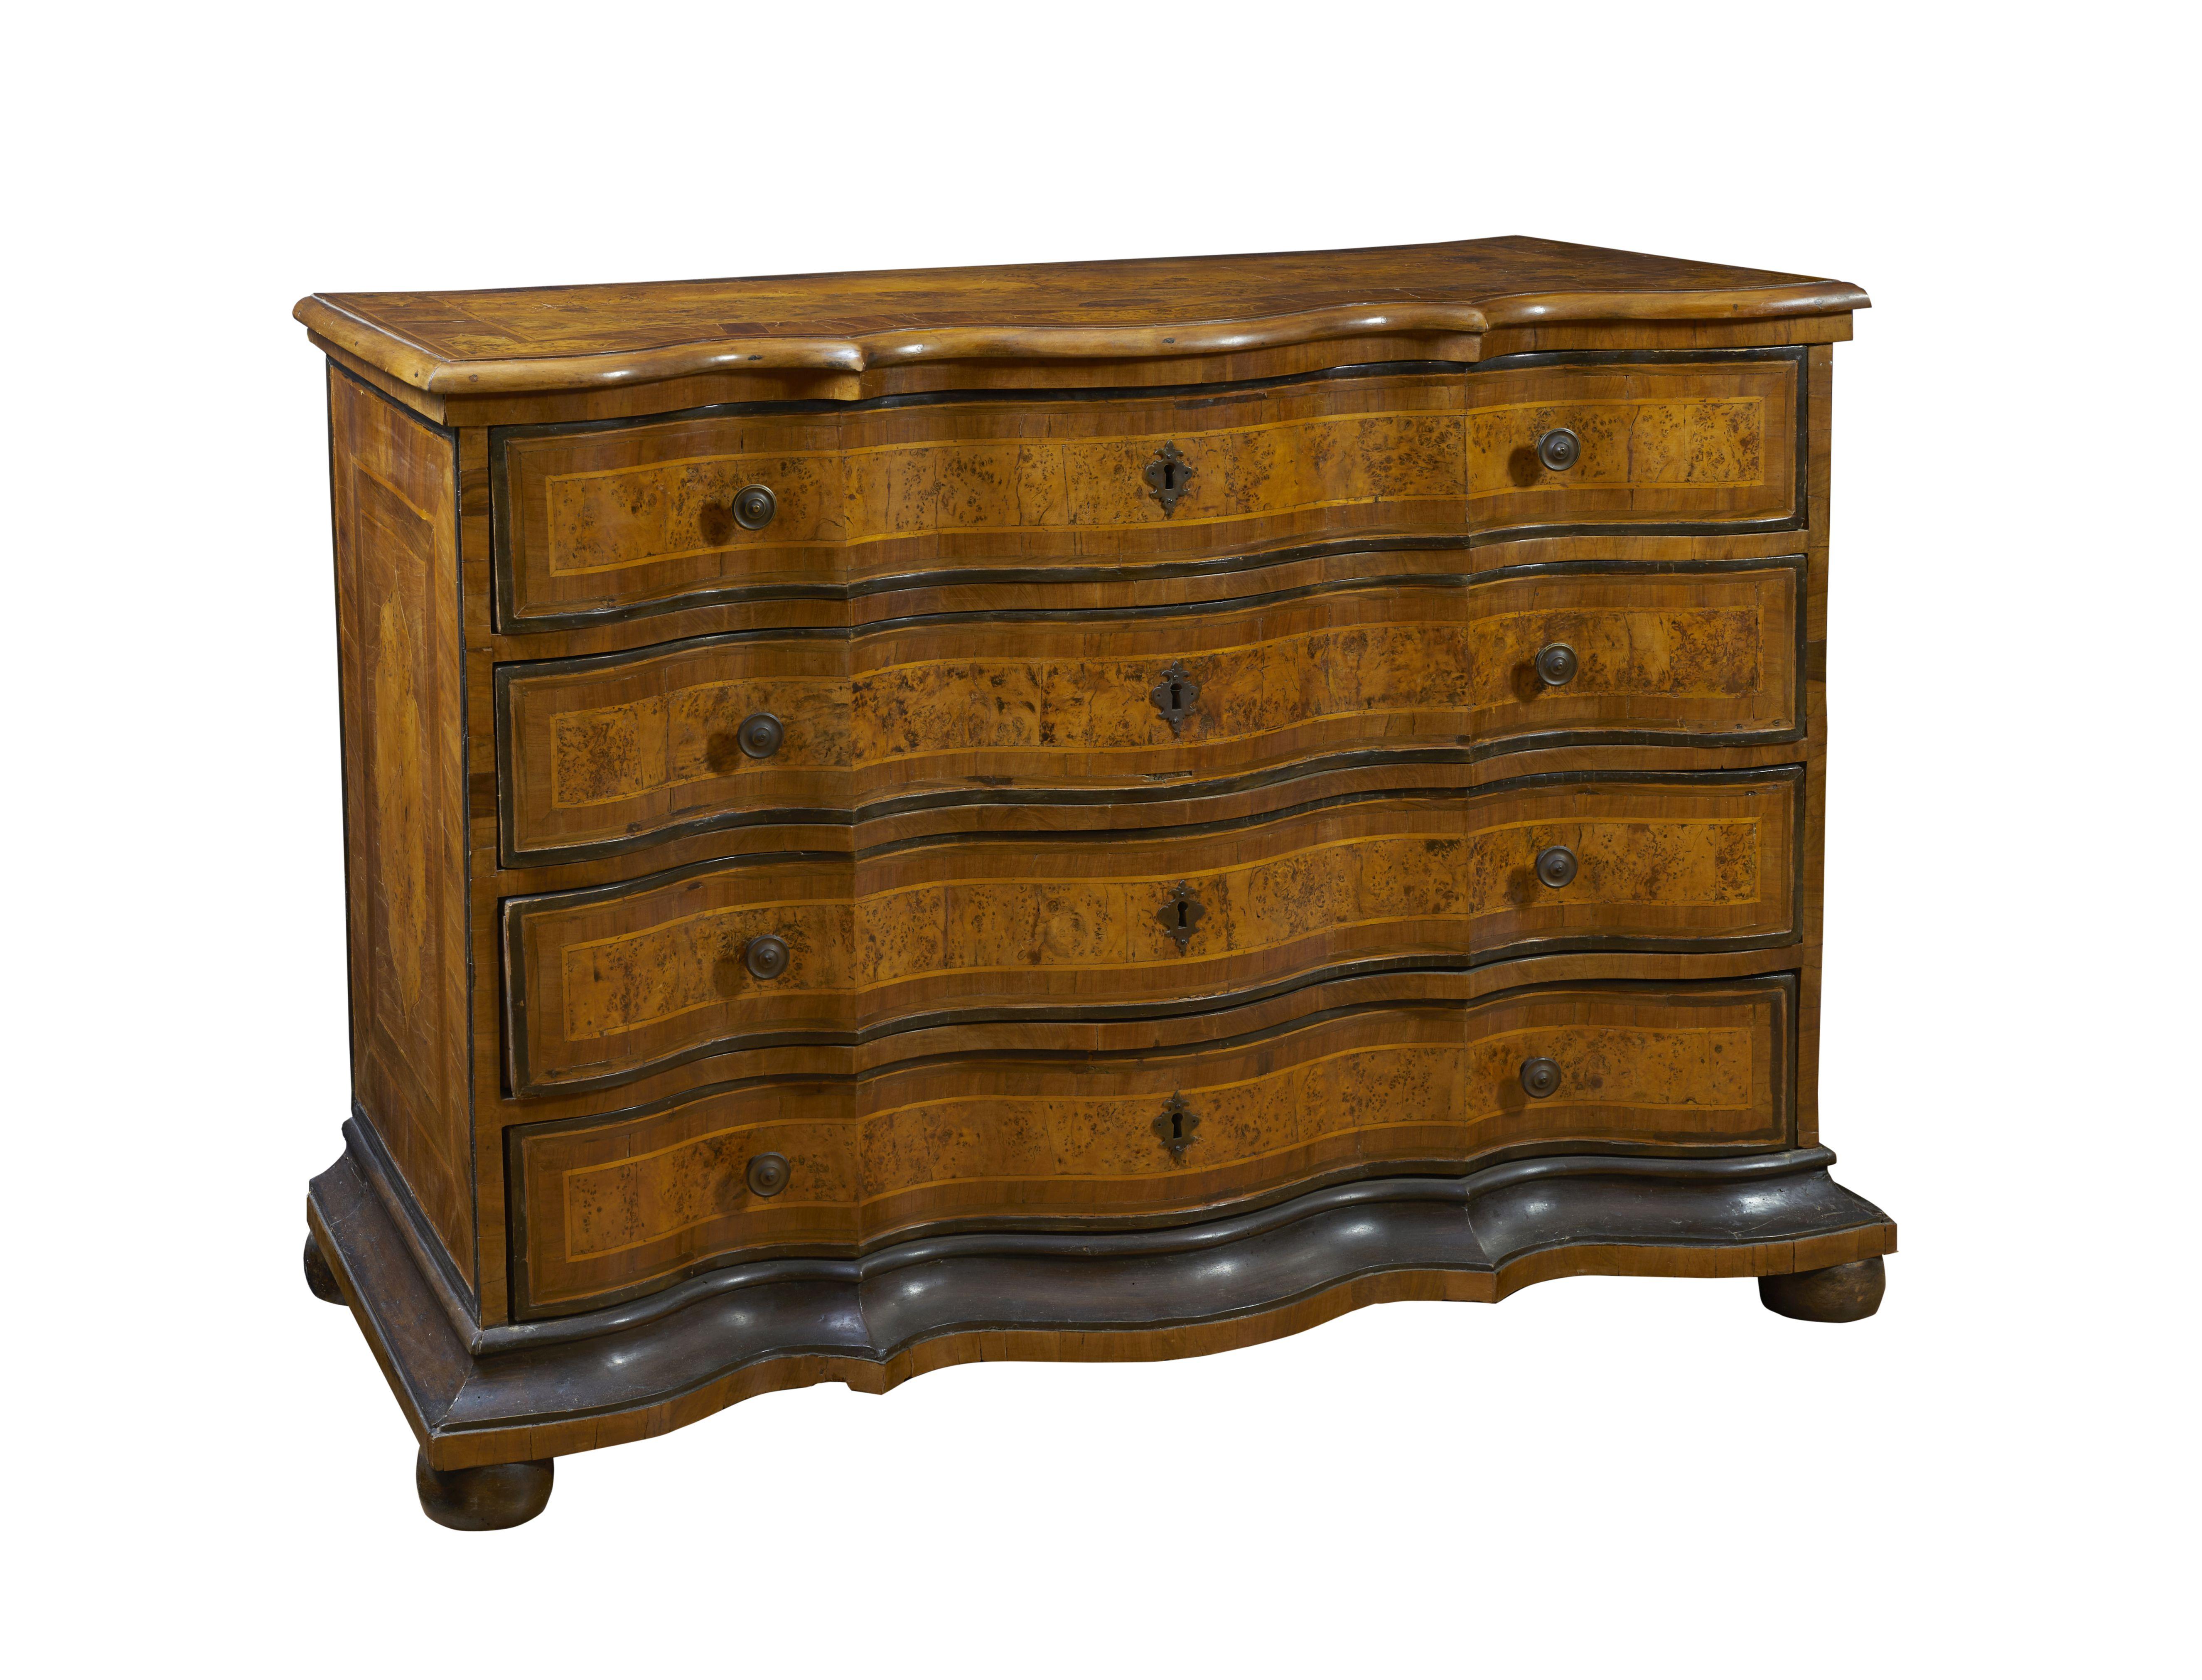 Venetian chest of drawers in walnut, burr walnut, thuja and poplar interior measuring 105 x 135 x 55 cm moved centrally in an elegant and delightful manner from the beginning of the 18th century.

The incessant alternation of undulation